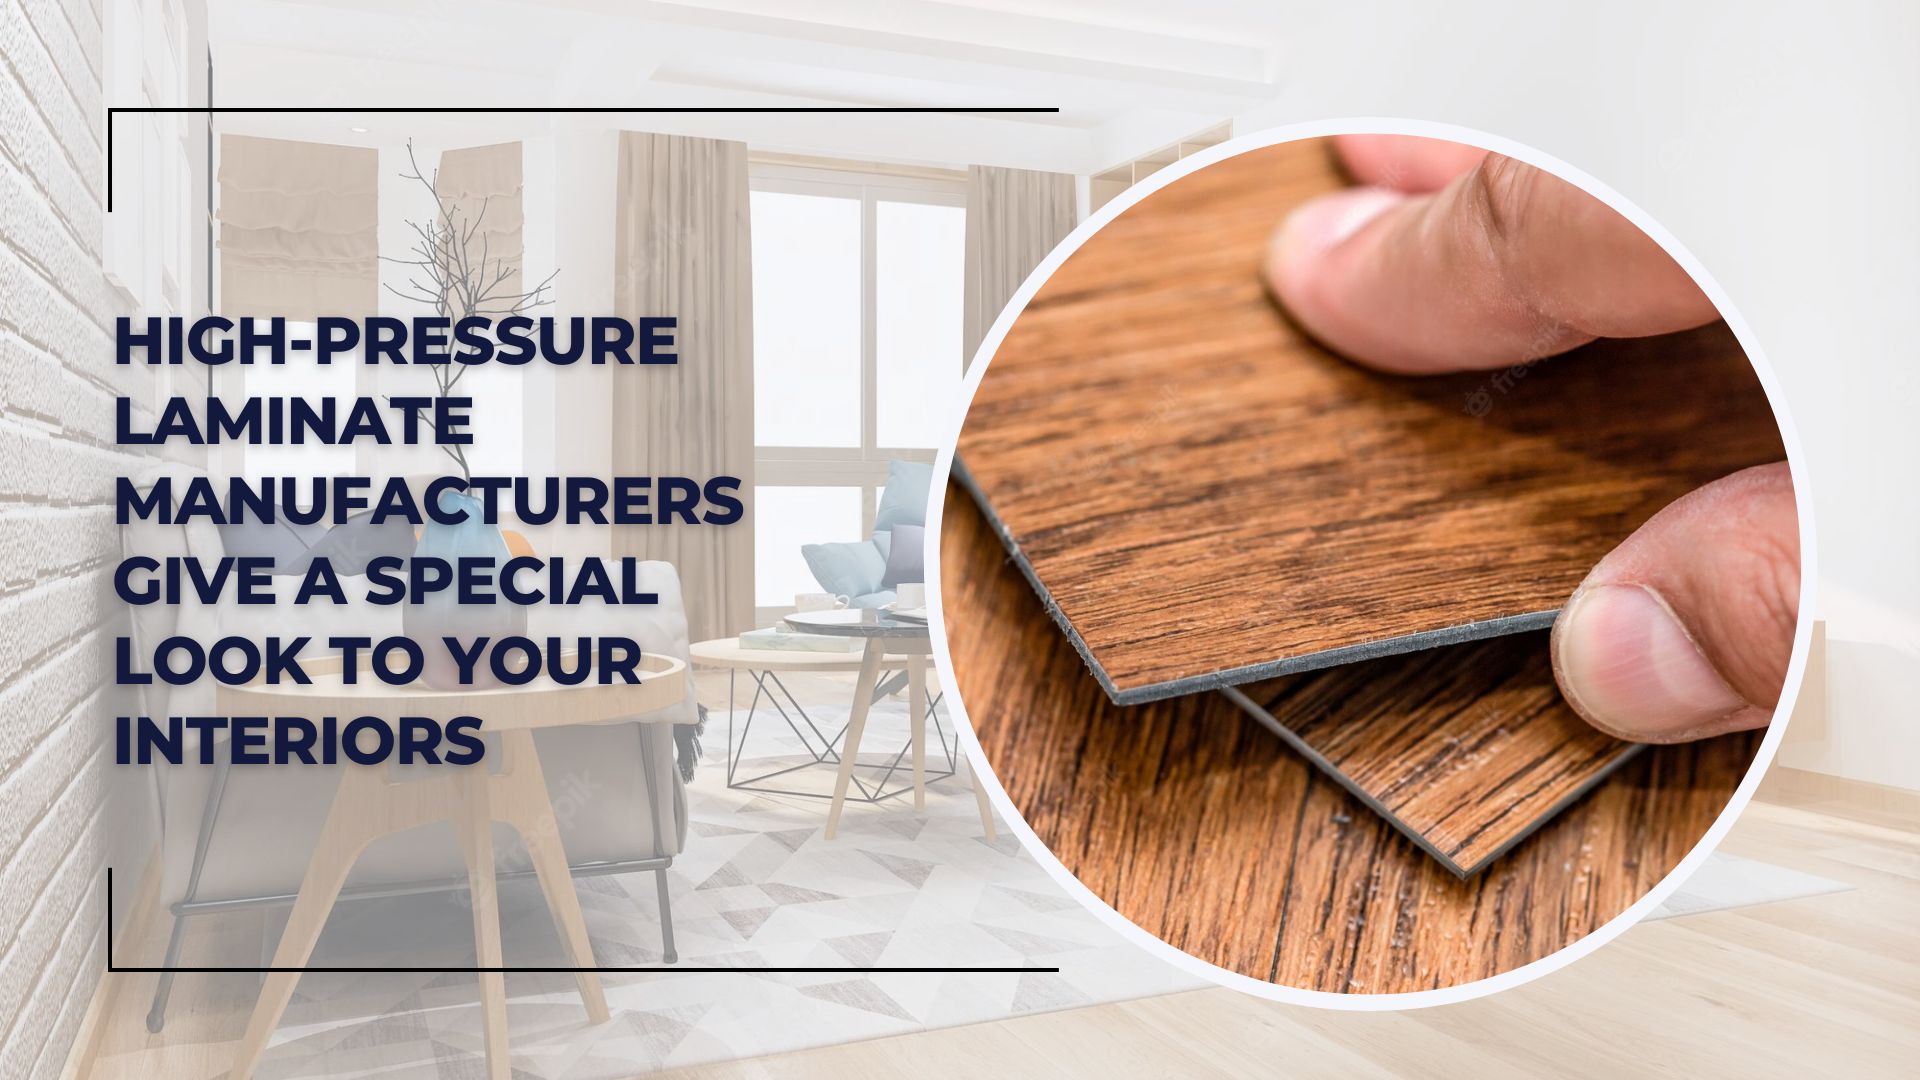 High-Pressure Laminate Manufacturers Give a Special Look To Your Interiors